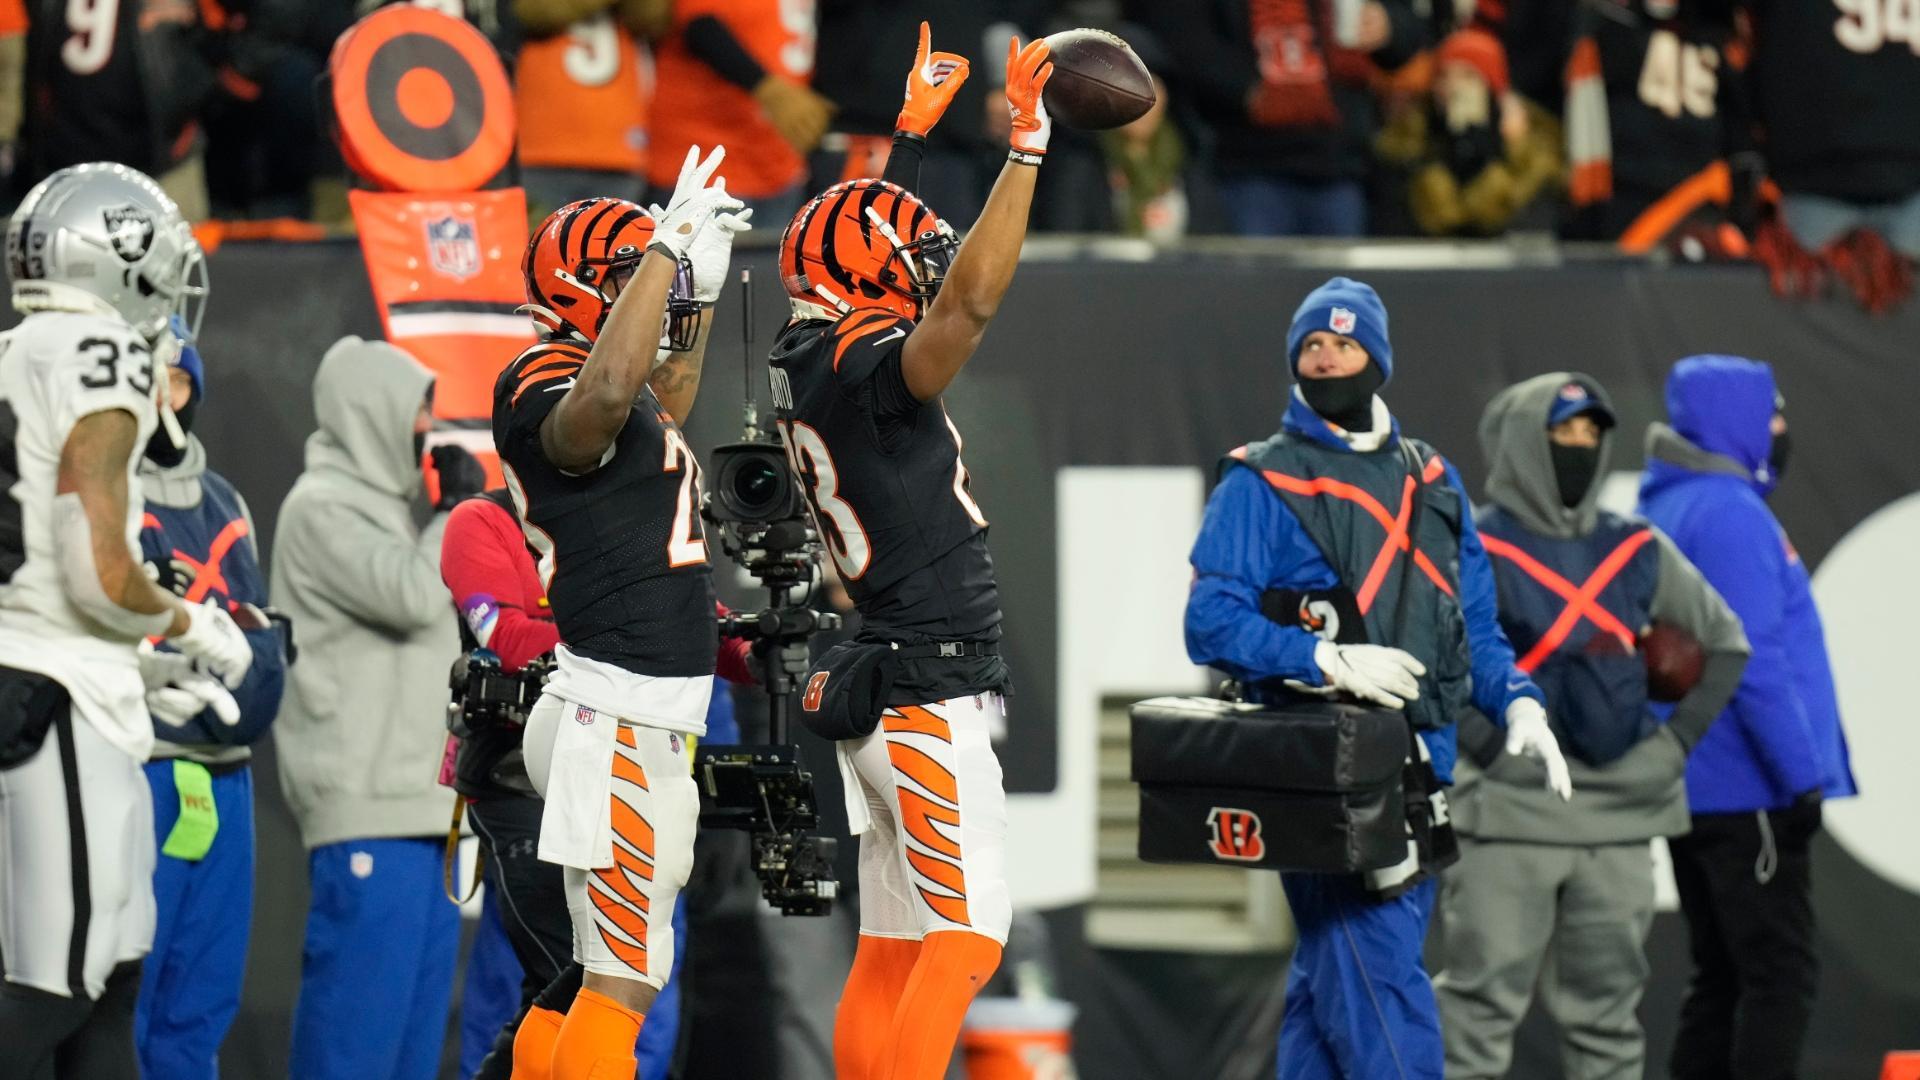 Burrow slings his 2nd TD to extend Bengals' lead